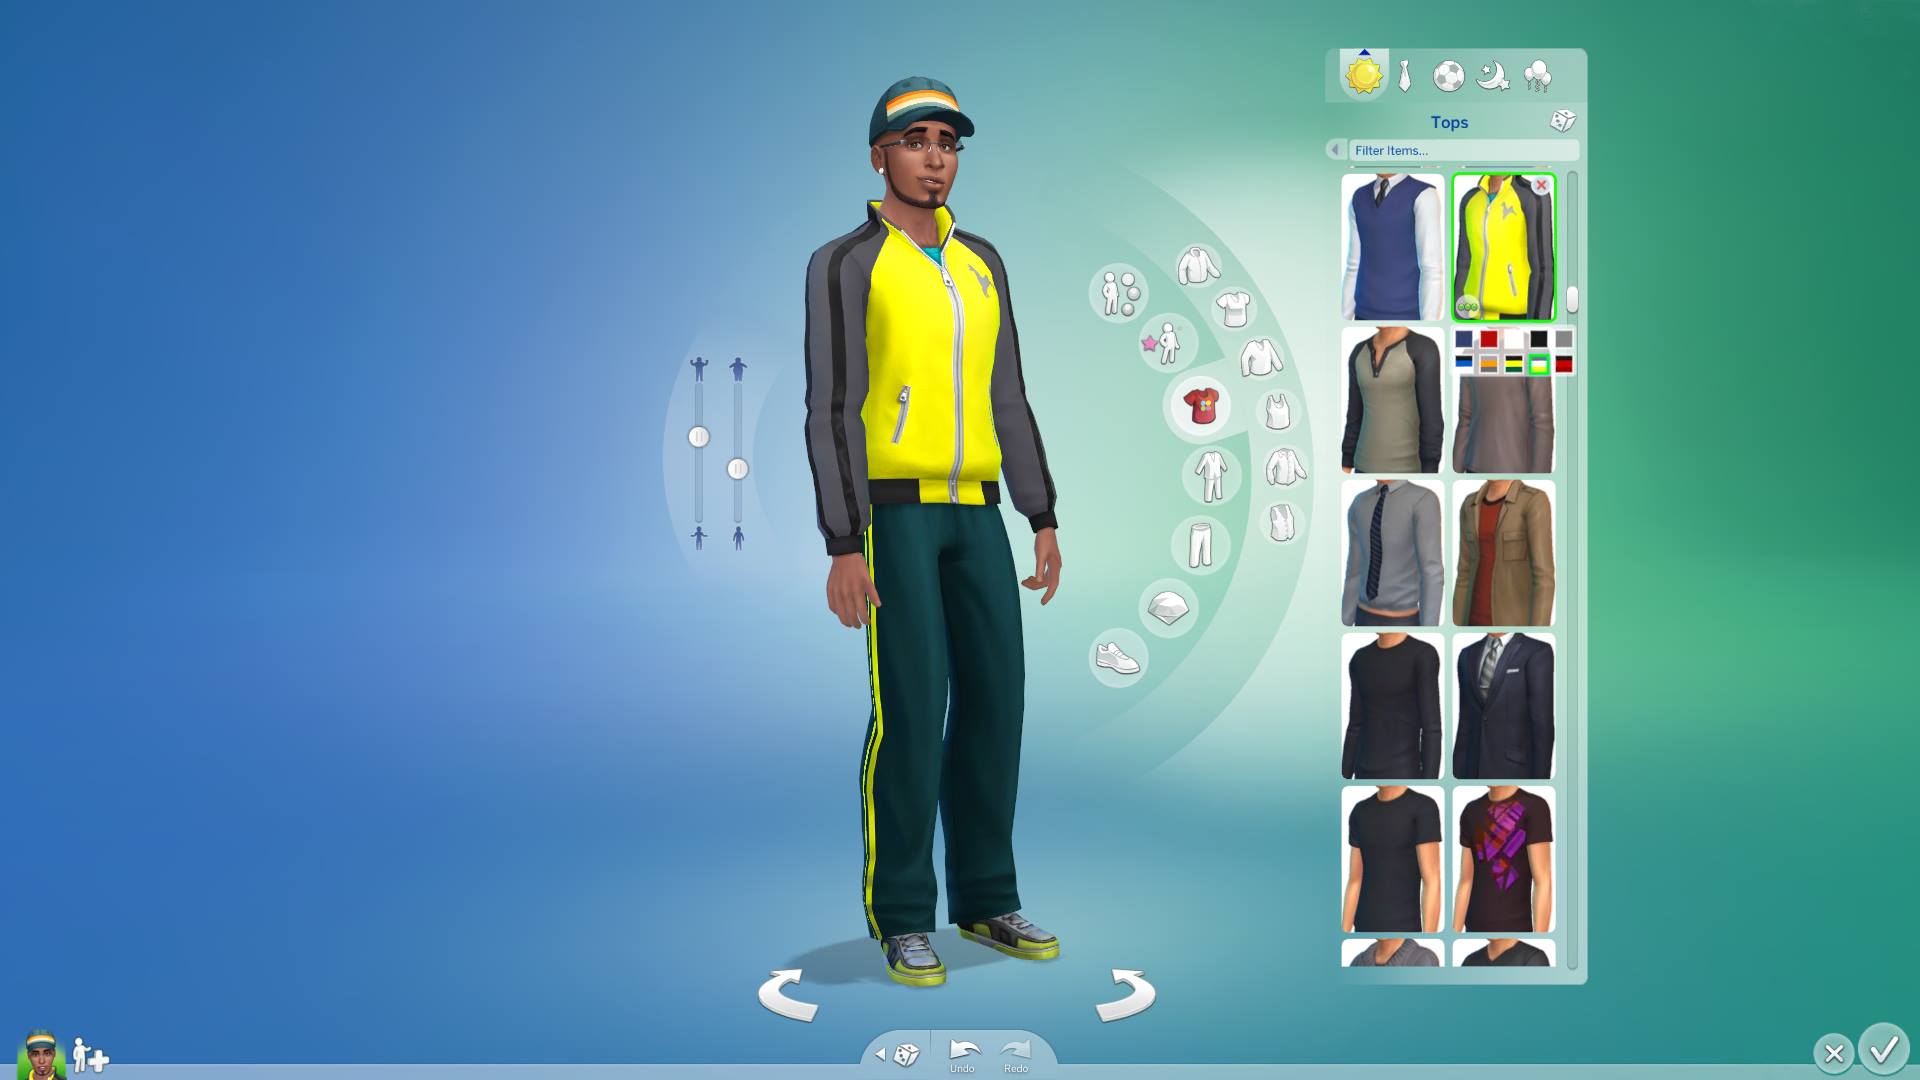 Sims 4 Create A Sim: Male Clothing Options Preview